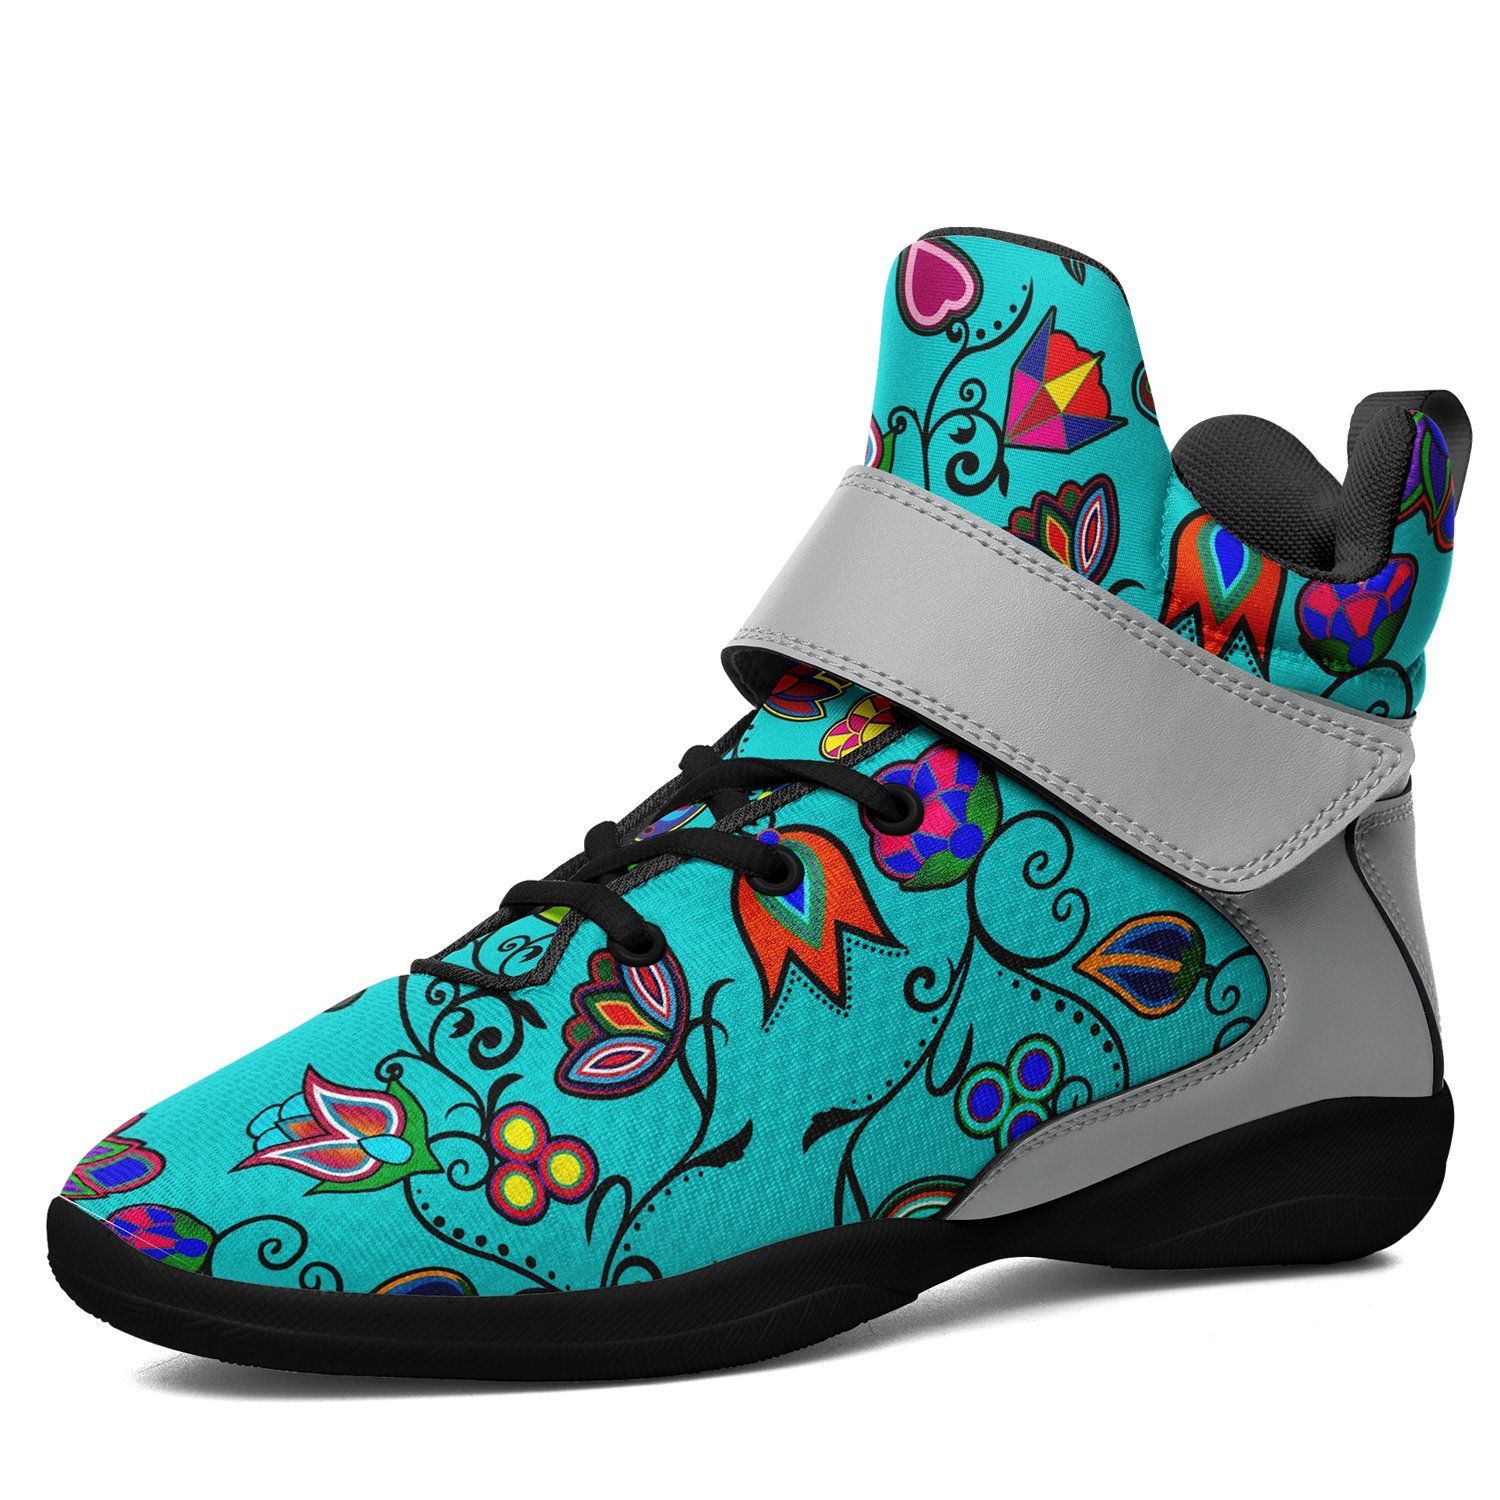 Indigenous Paisley Sky Kid's Ipottaa Basketball / Sport High Top Shoes 49 Dzine US Child 12.5 / EUR 30 Black Sole with Gray Strap 